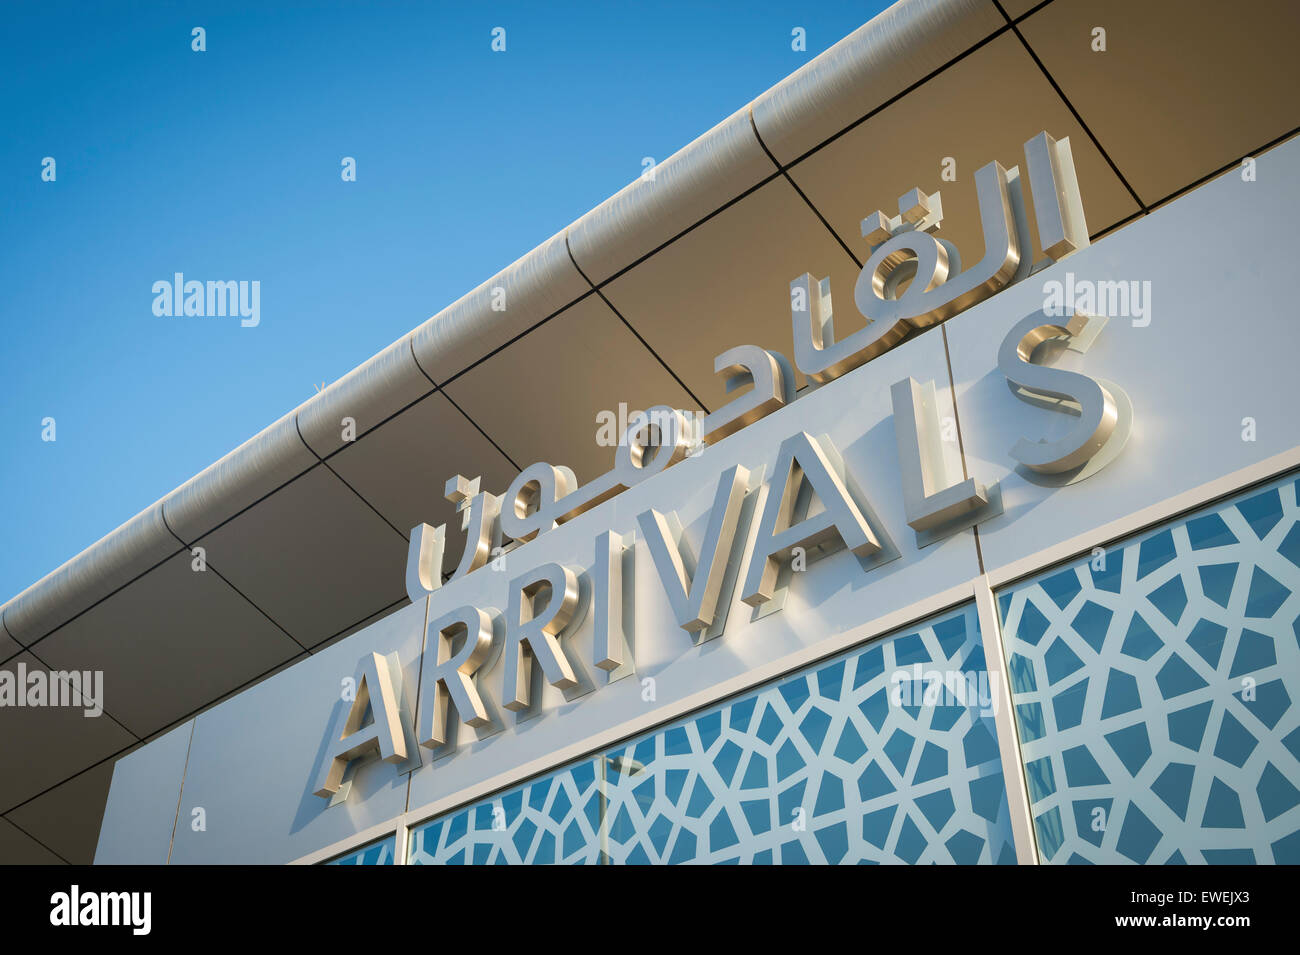 Arrivals sign at an airport in the Middle East features Arabic text and Islamic patterns under modern architecture and blue sky Stock Photo